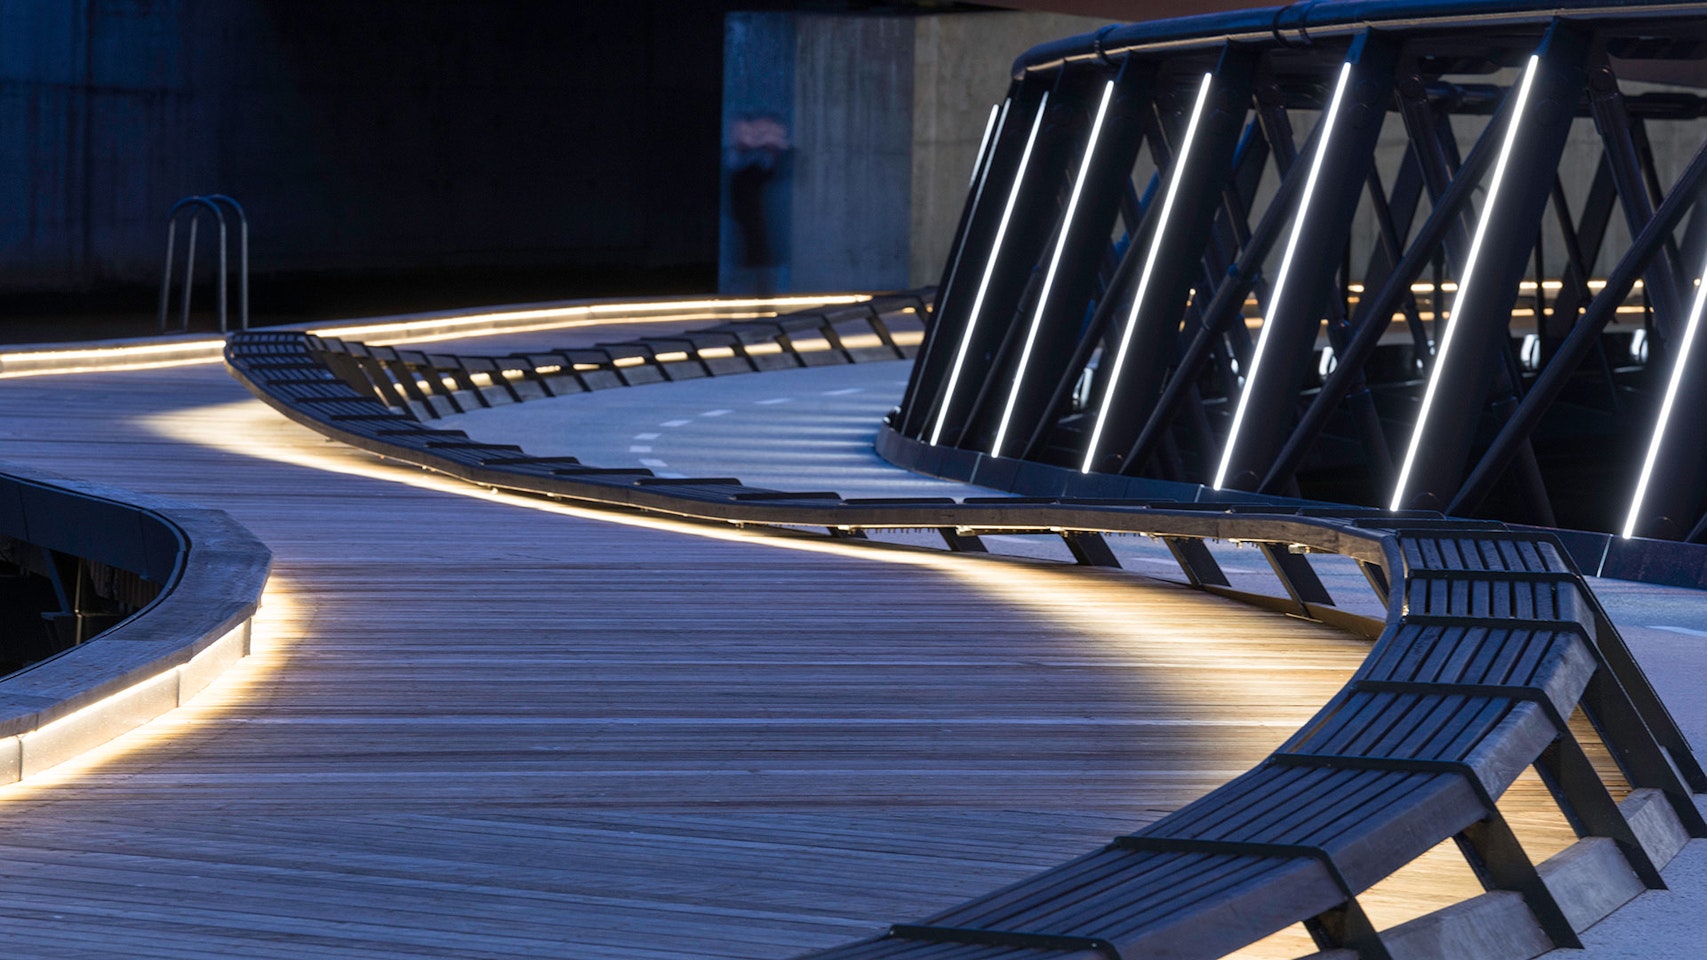 Electro IP robust outdoor LED luminaire in application, installed on the Jim Stynes Bridge in Melbourne.